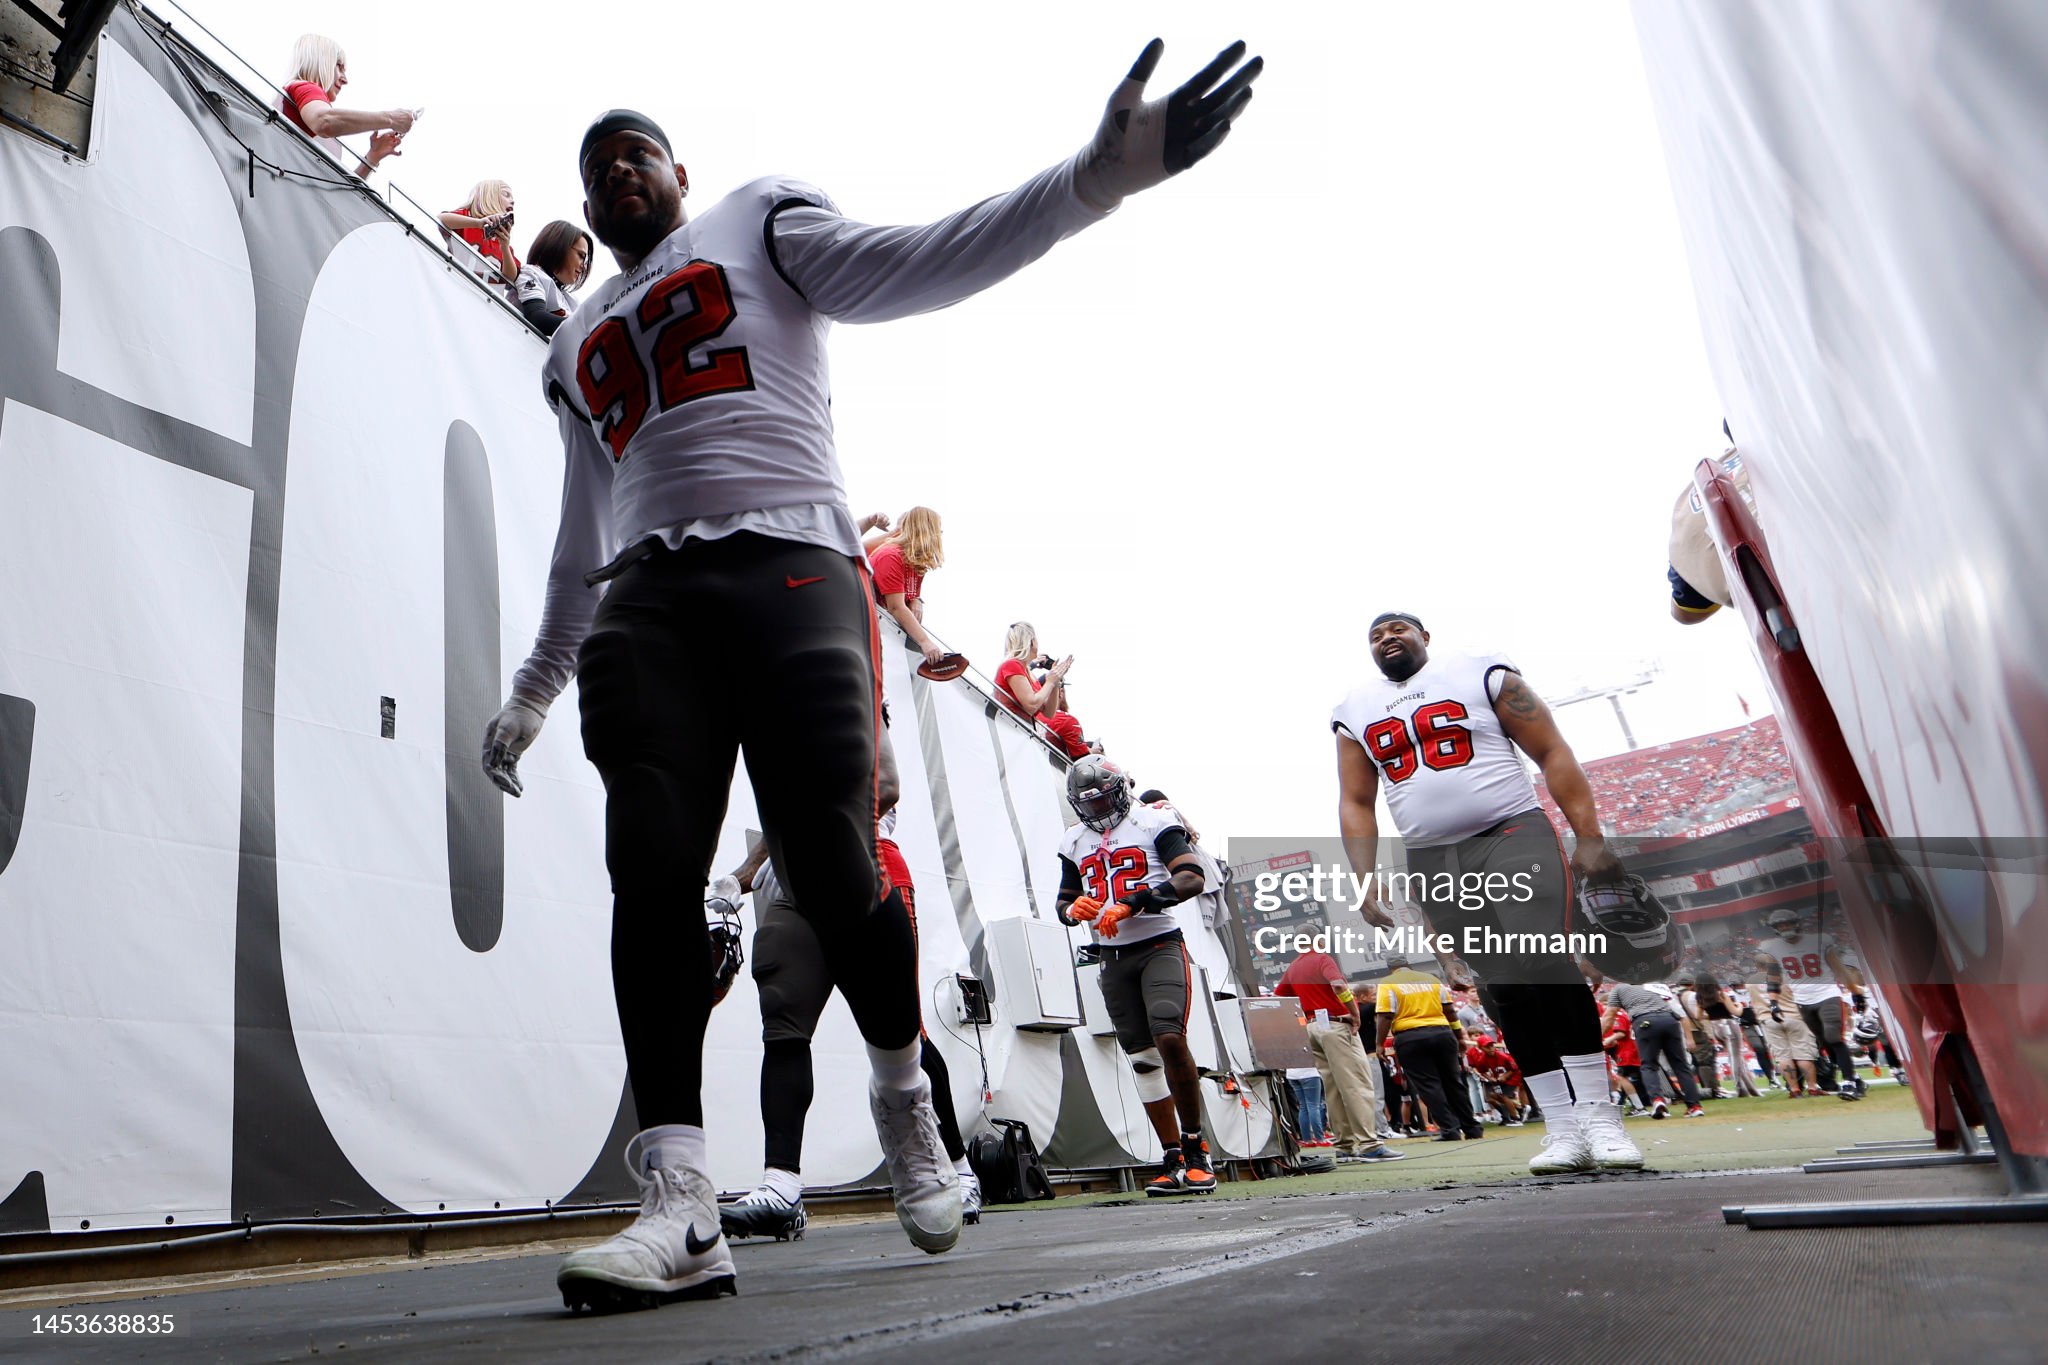 TAMPA, FLORIDA - JANUARY 01: William Gholston #92 of the Tampa Bay Buccaneers high fives fans before playing against the Carolina Panthers at Raymond James Stadium on January 01, 2023 in Tampa, Florida. (Photo by Mike Ehrmann/Getty Images)